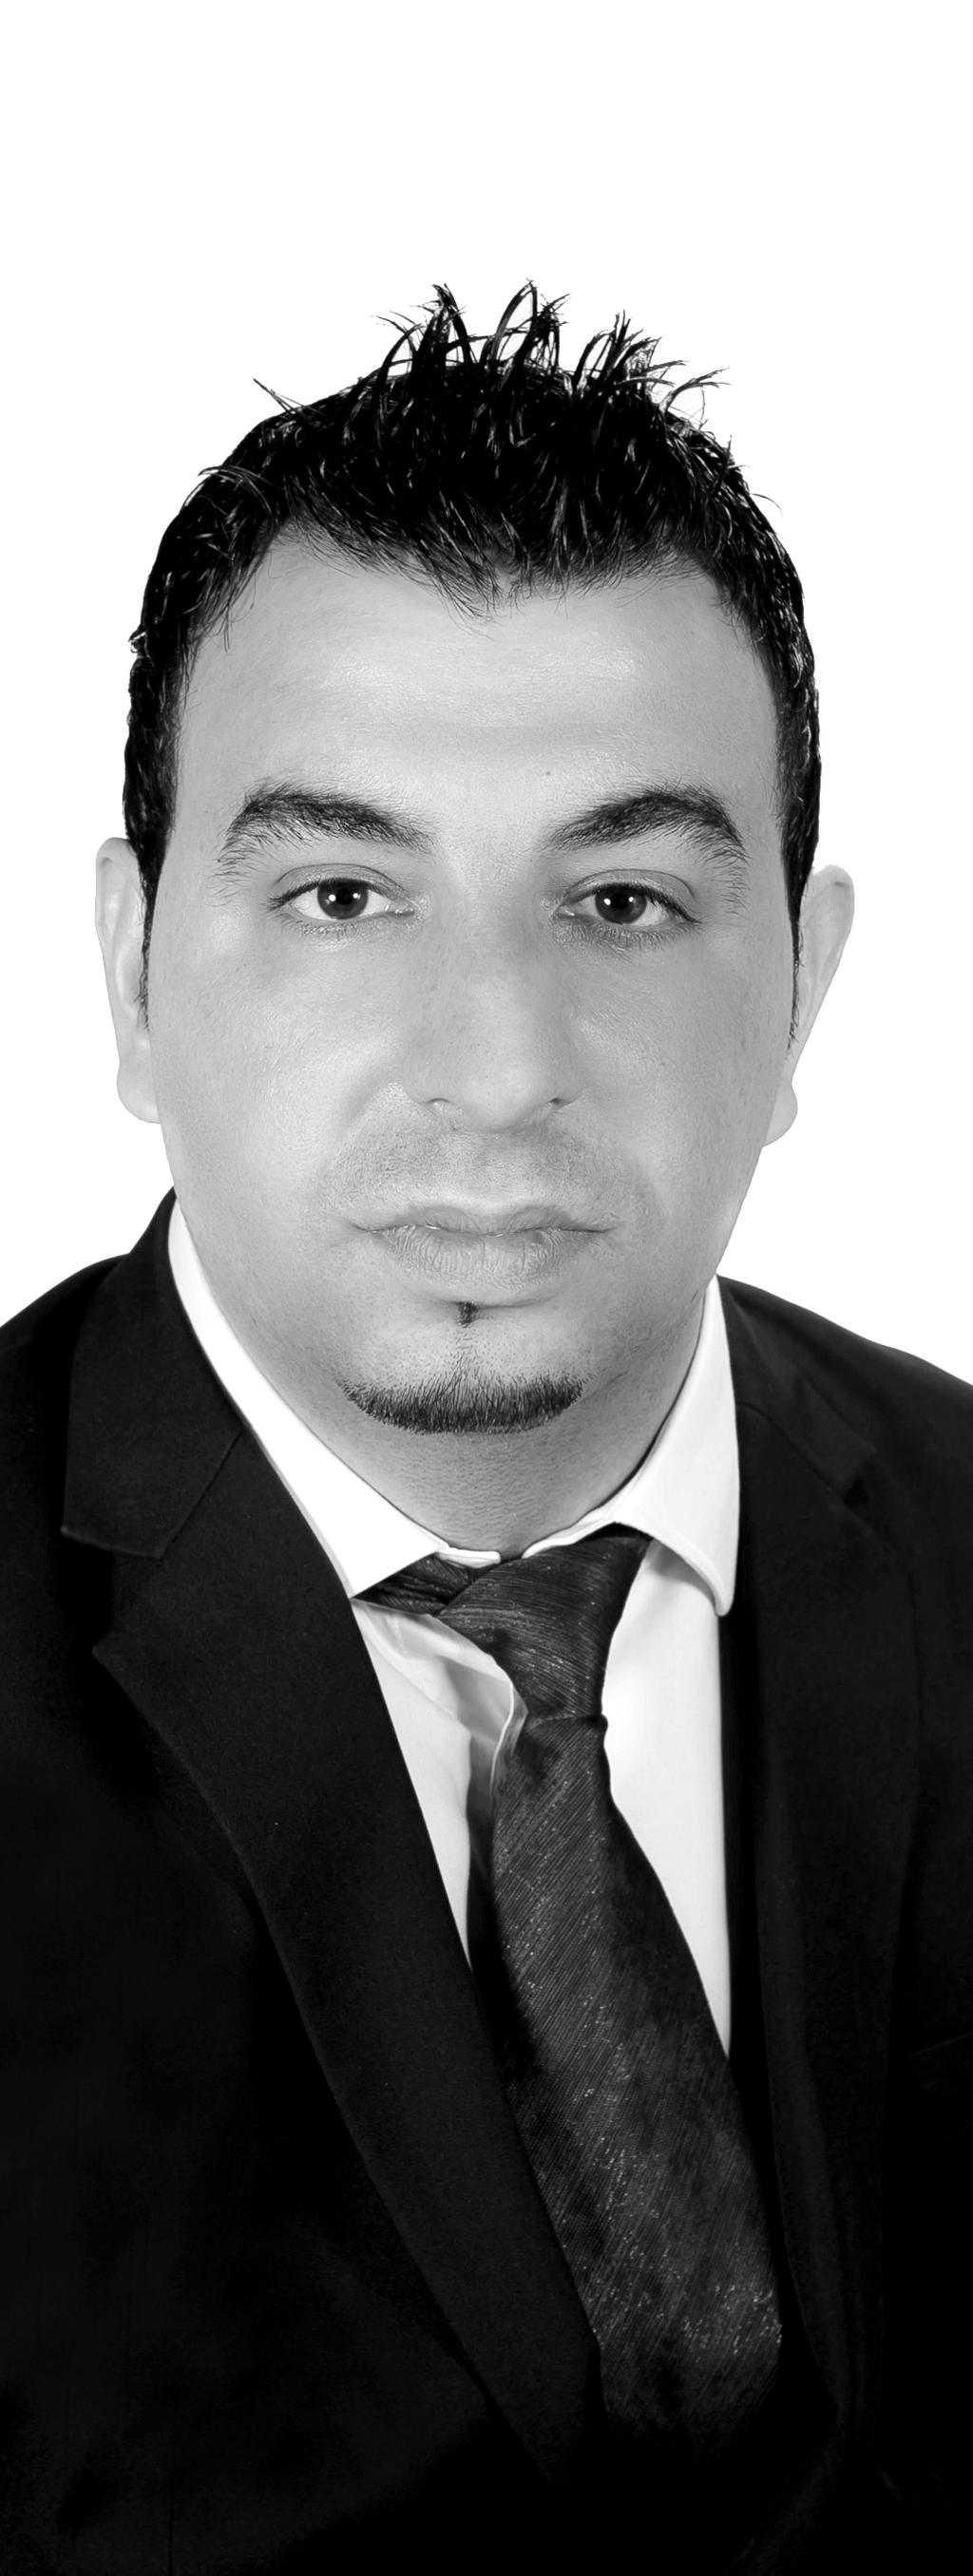 www.nzaudit.com Demetris Zachariades Demetris is a member of the Association of Chartered Certified Accountants (ACCA) and a member of the Institute of Certified Public Accountants in Cyprus (ICPAC).